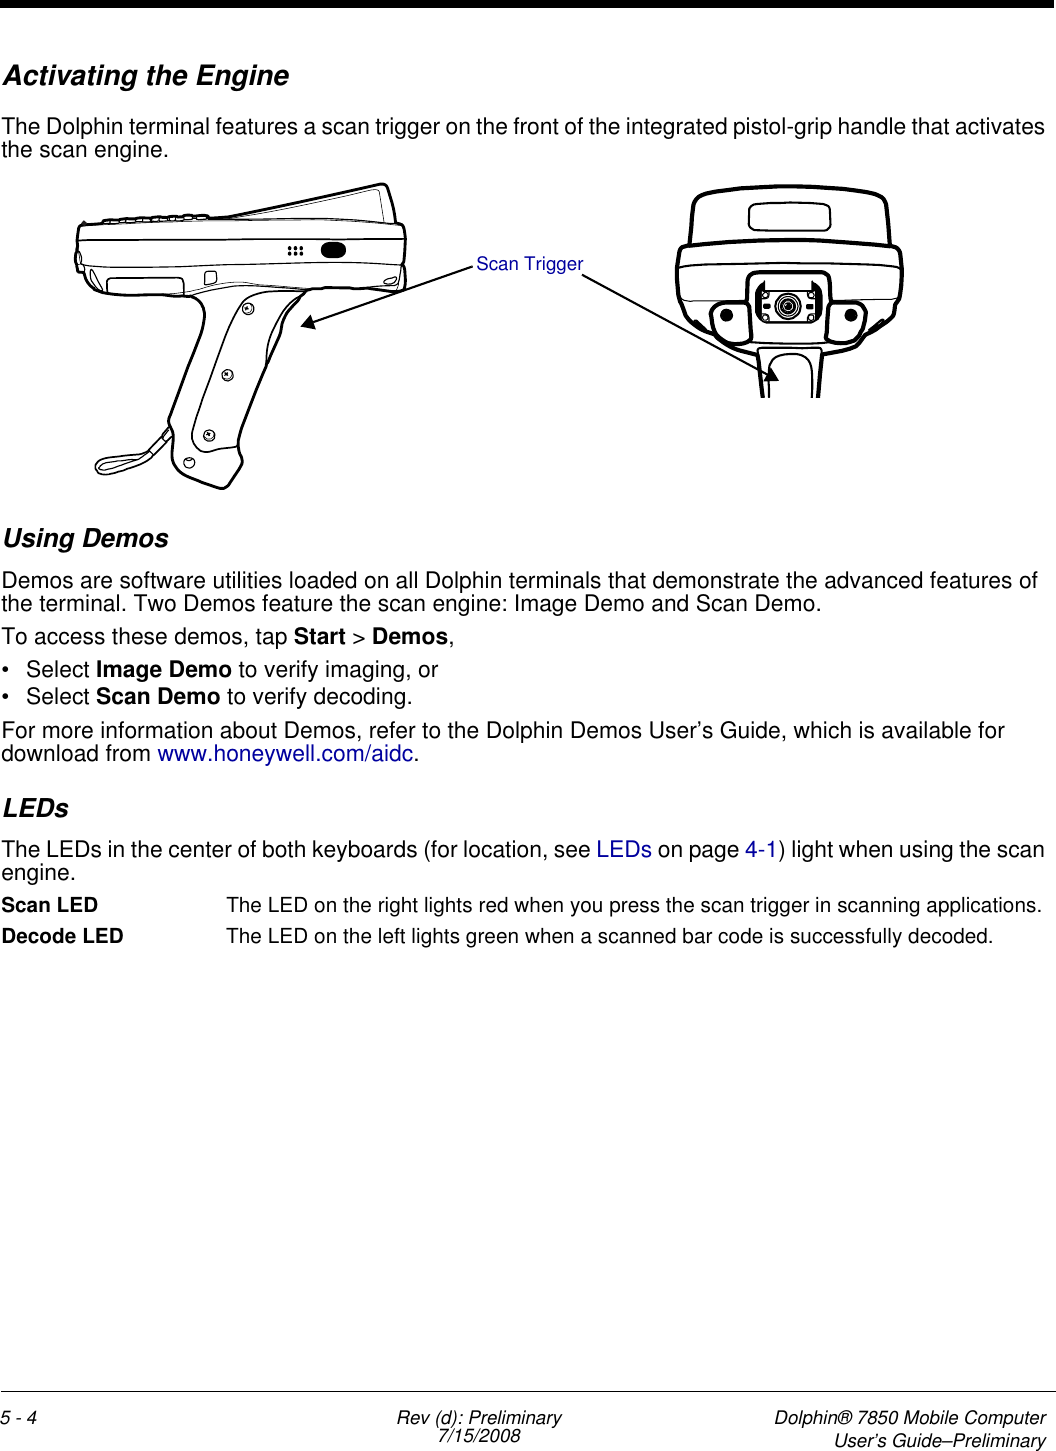 5 - 4 Rev (d): Preliminary7/15/2008 Dolphin® 7850 Mobile ComputerUser’s Guide–PreliminaryActivating the EngineThe Dolphin terminal features a scan trigger on the front of the integrated pistol-grip handle that activates the scan engine.Using DemosDemos are software utilities loaded on all Dolphin terminals that demonstrate the advanced features of the terminal. Two Demos feature the scan engine: Image Demo and Scan Demo.To access these demos, tap Start &gt; Demos,• Select Image Demo to verify imaging, or• Select Scan Demo to verify decoding.For more information about Demos, refer to the Dolphin Demos User’s Guide, which is available for download from www.honeywell.com/aidc.LEDsThe LEDs in the center of both keyboards (for location, see LEDs on page 4-1) light when using the scan engine.Scan LED  The LED on the right lights red when you press the scan trigger in scanning applications.Decode LED  The LED on the left lights green when a scanned bar code is successfully decoded.Scan Trigger